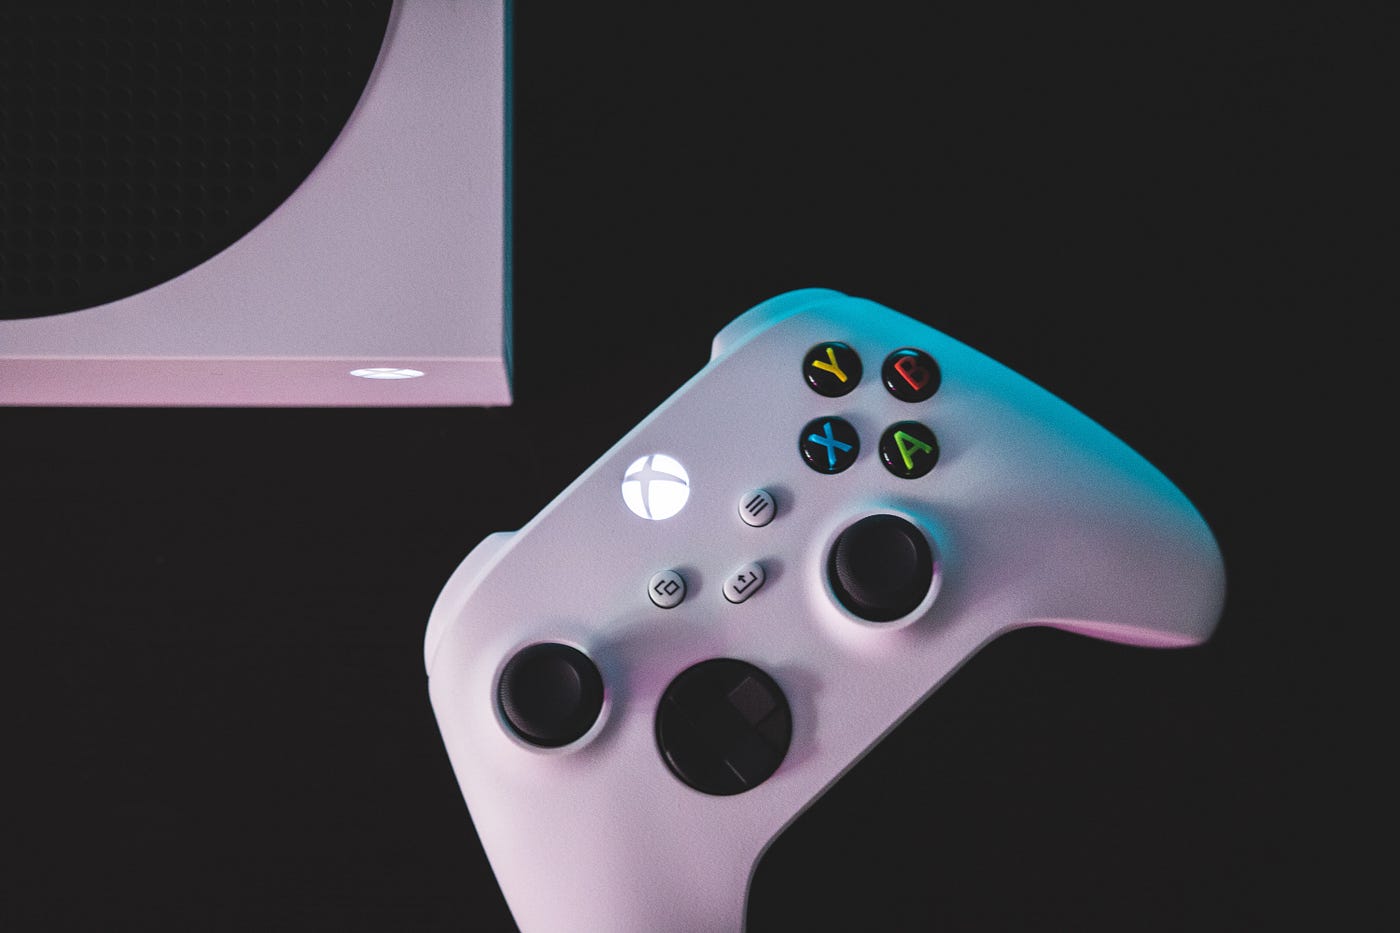 We Got a Look at a New Xbox Controller, Thanks to a Microsoft Leak, by  Aiden (Illumination Gaming), Technology Hits